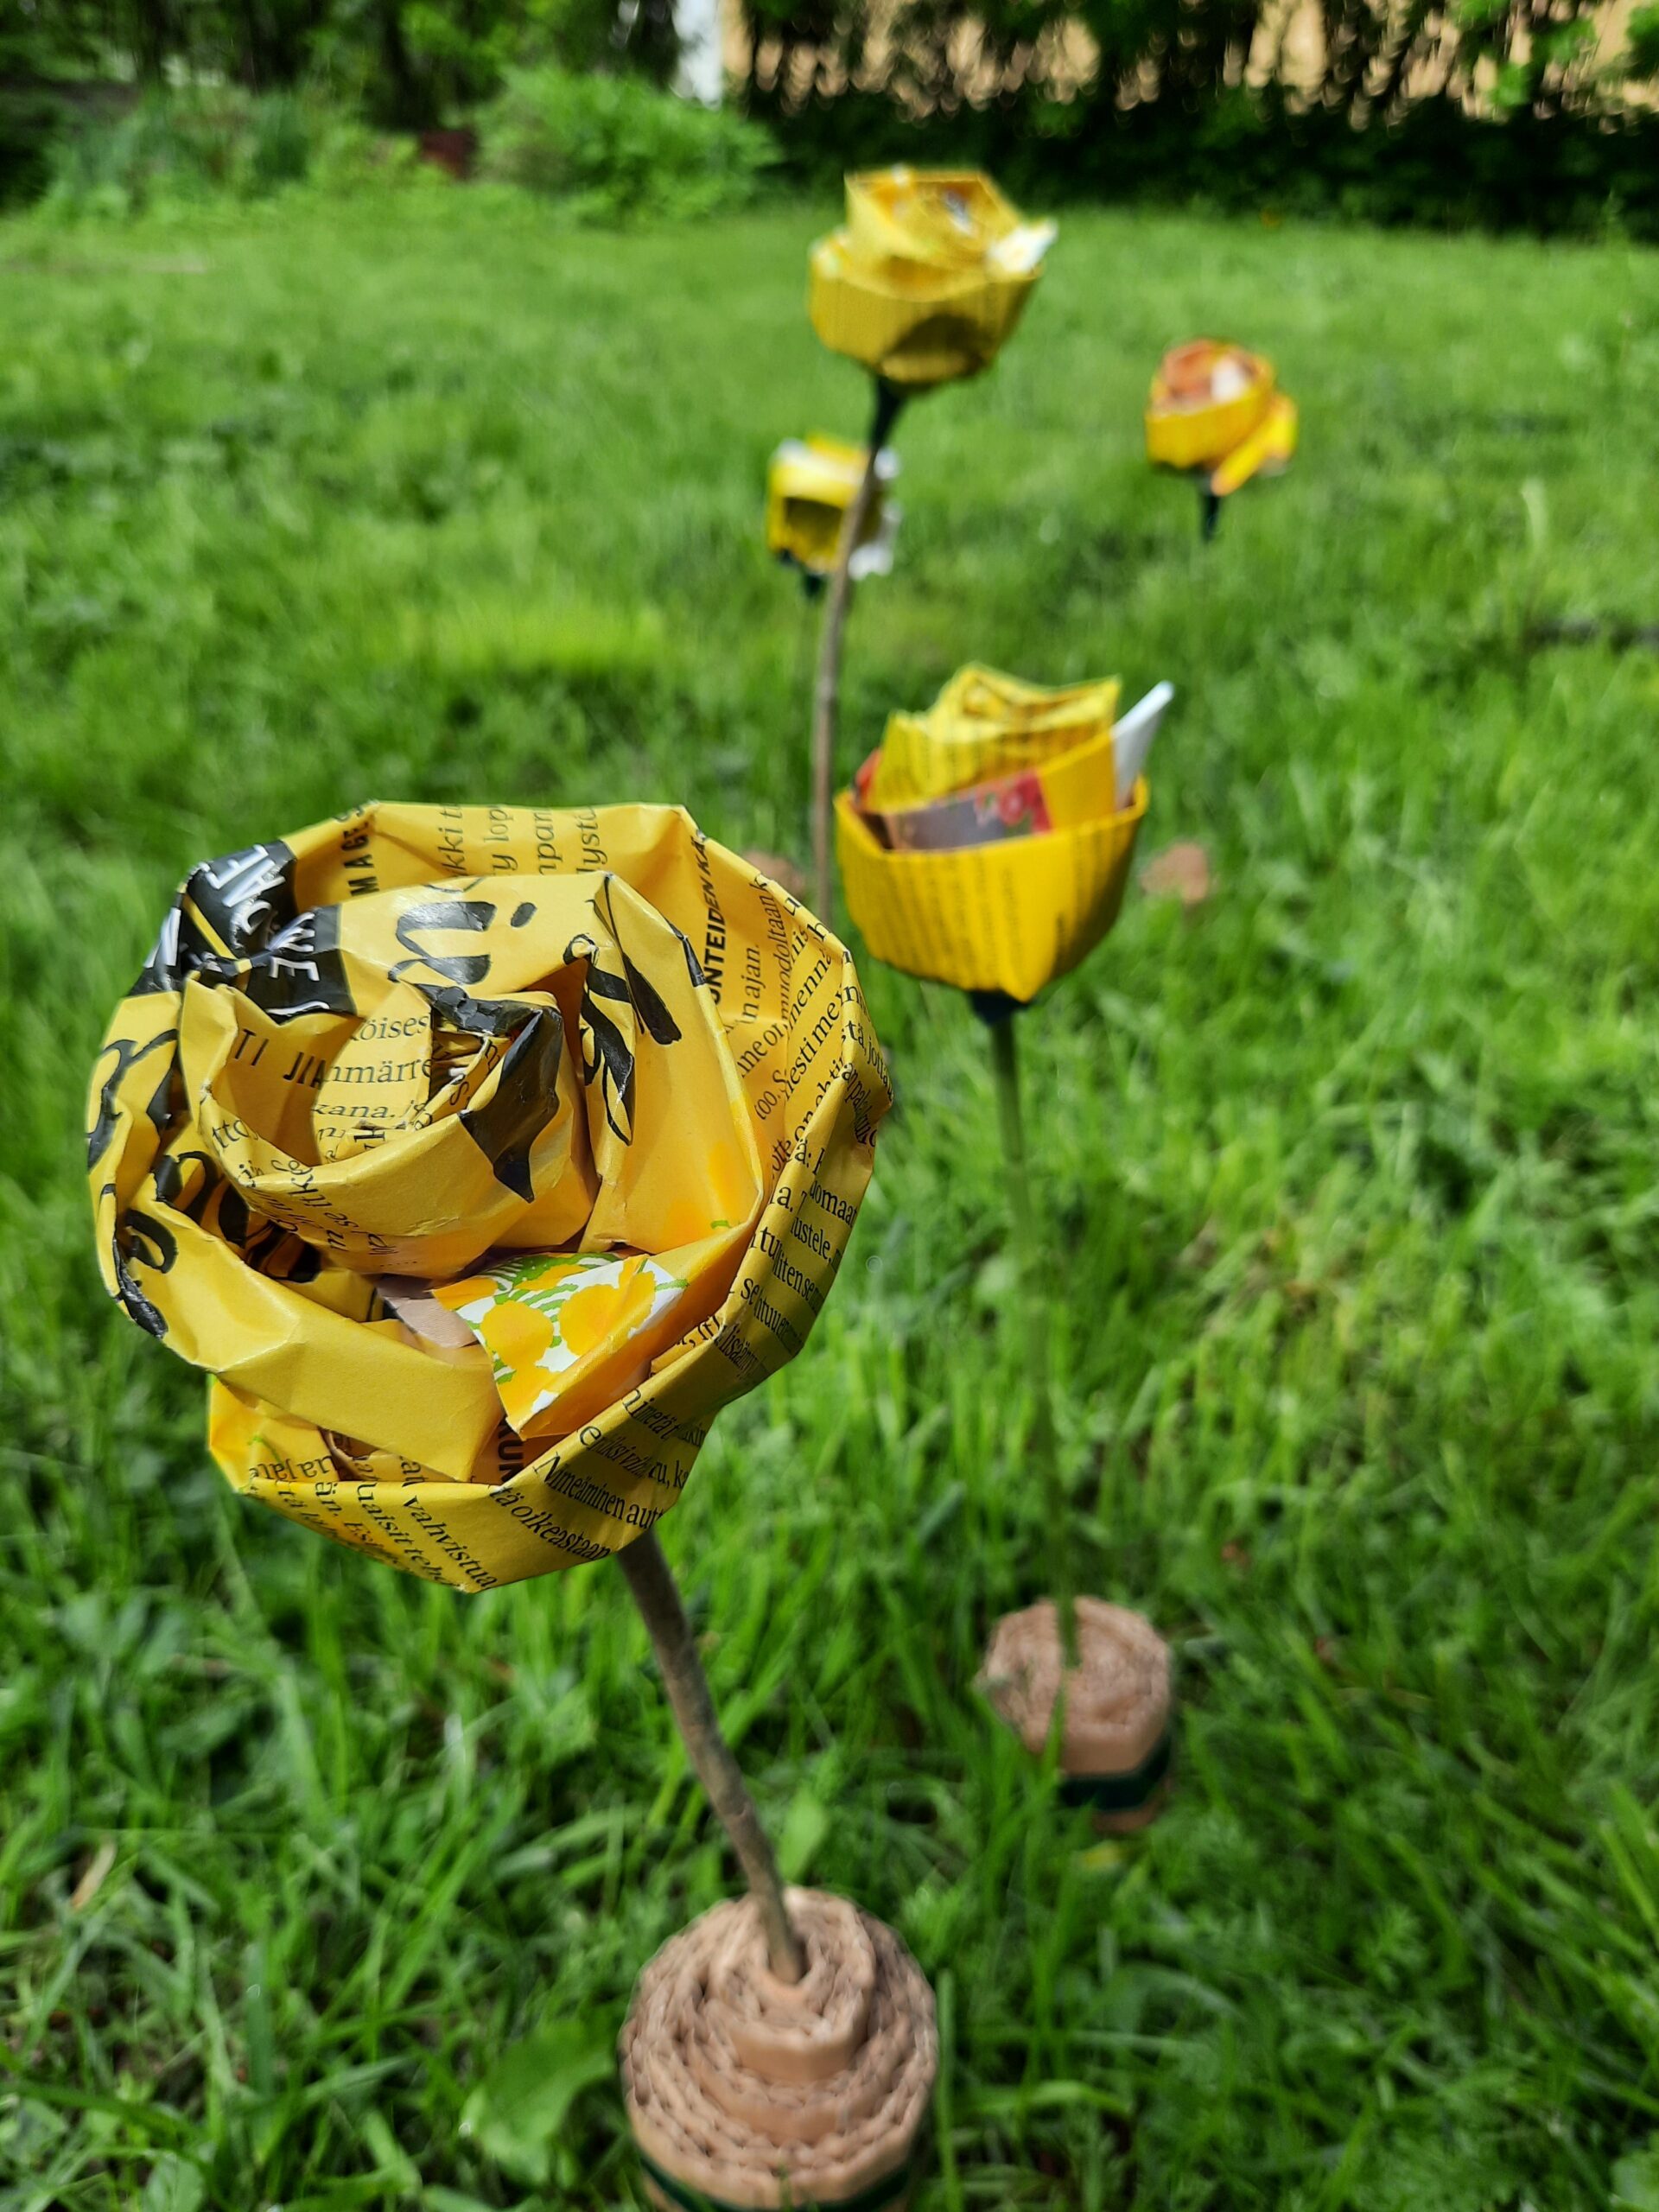 Yellow flower-like decorations on a grass field.